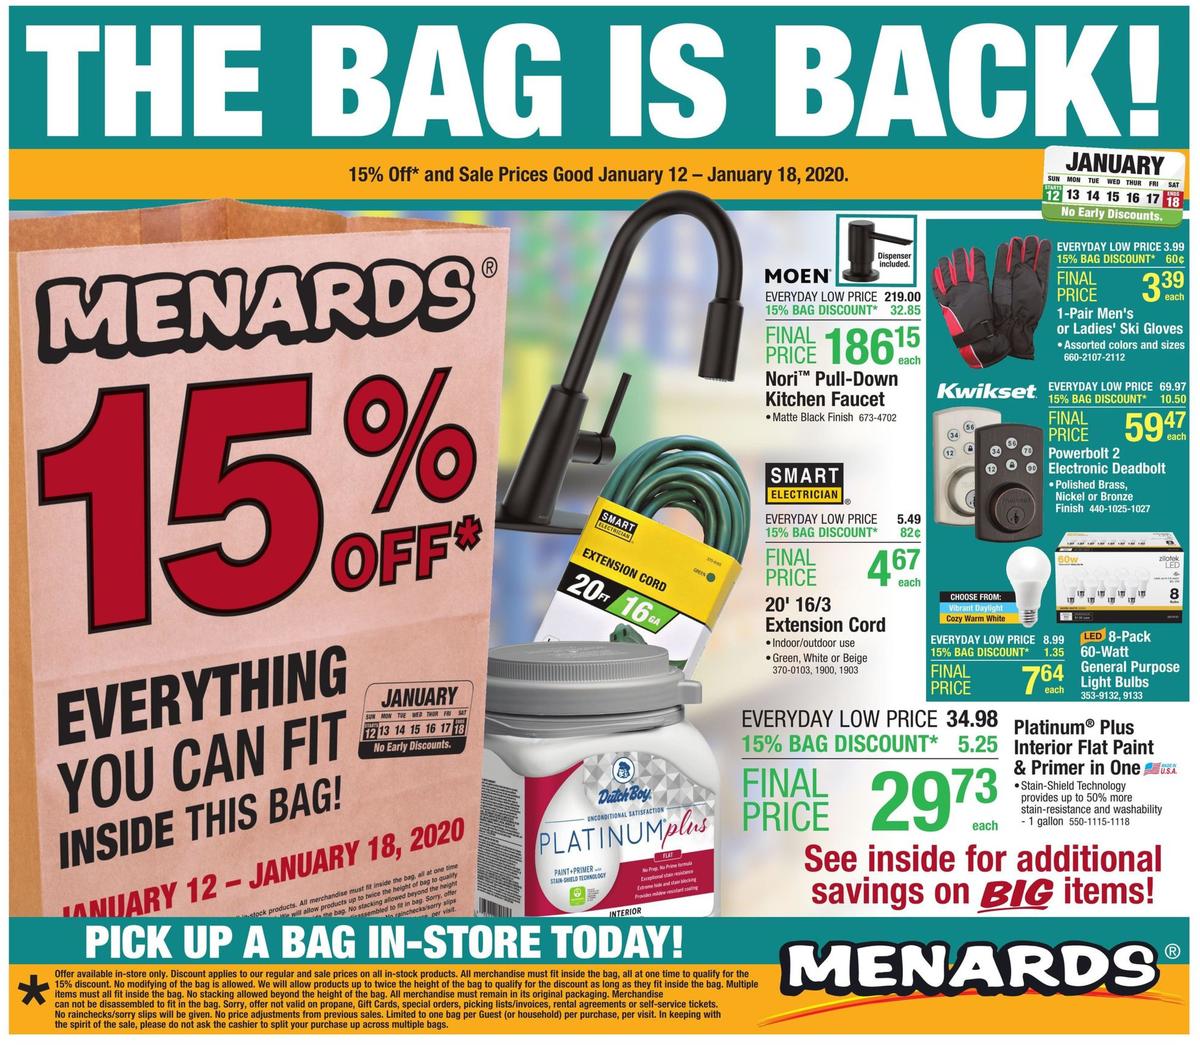 Menards Weekly Ads & Special Buys from January 12